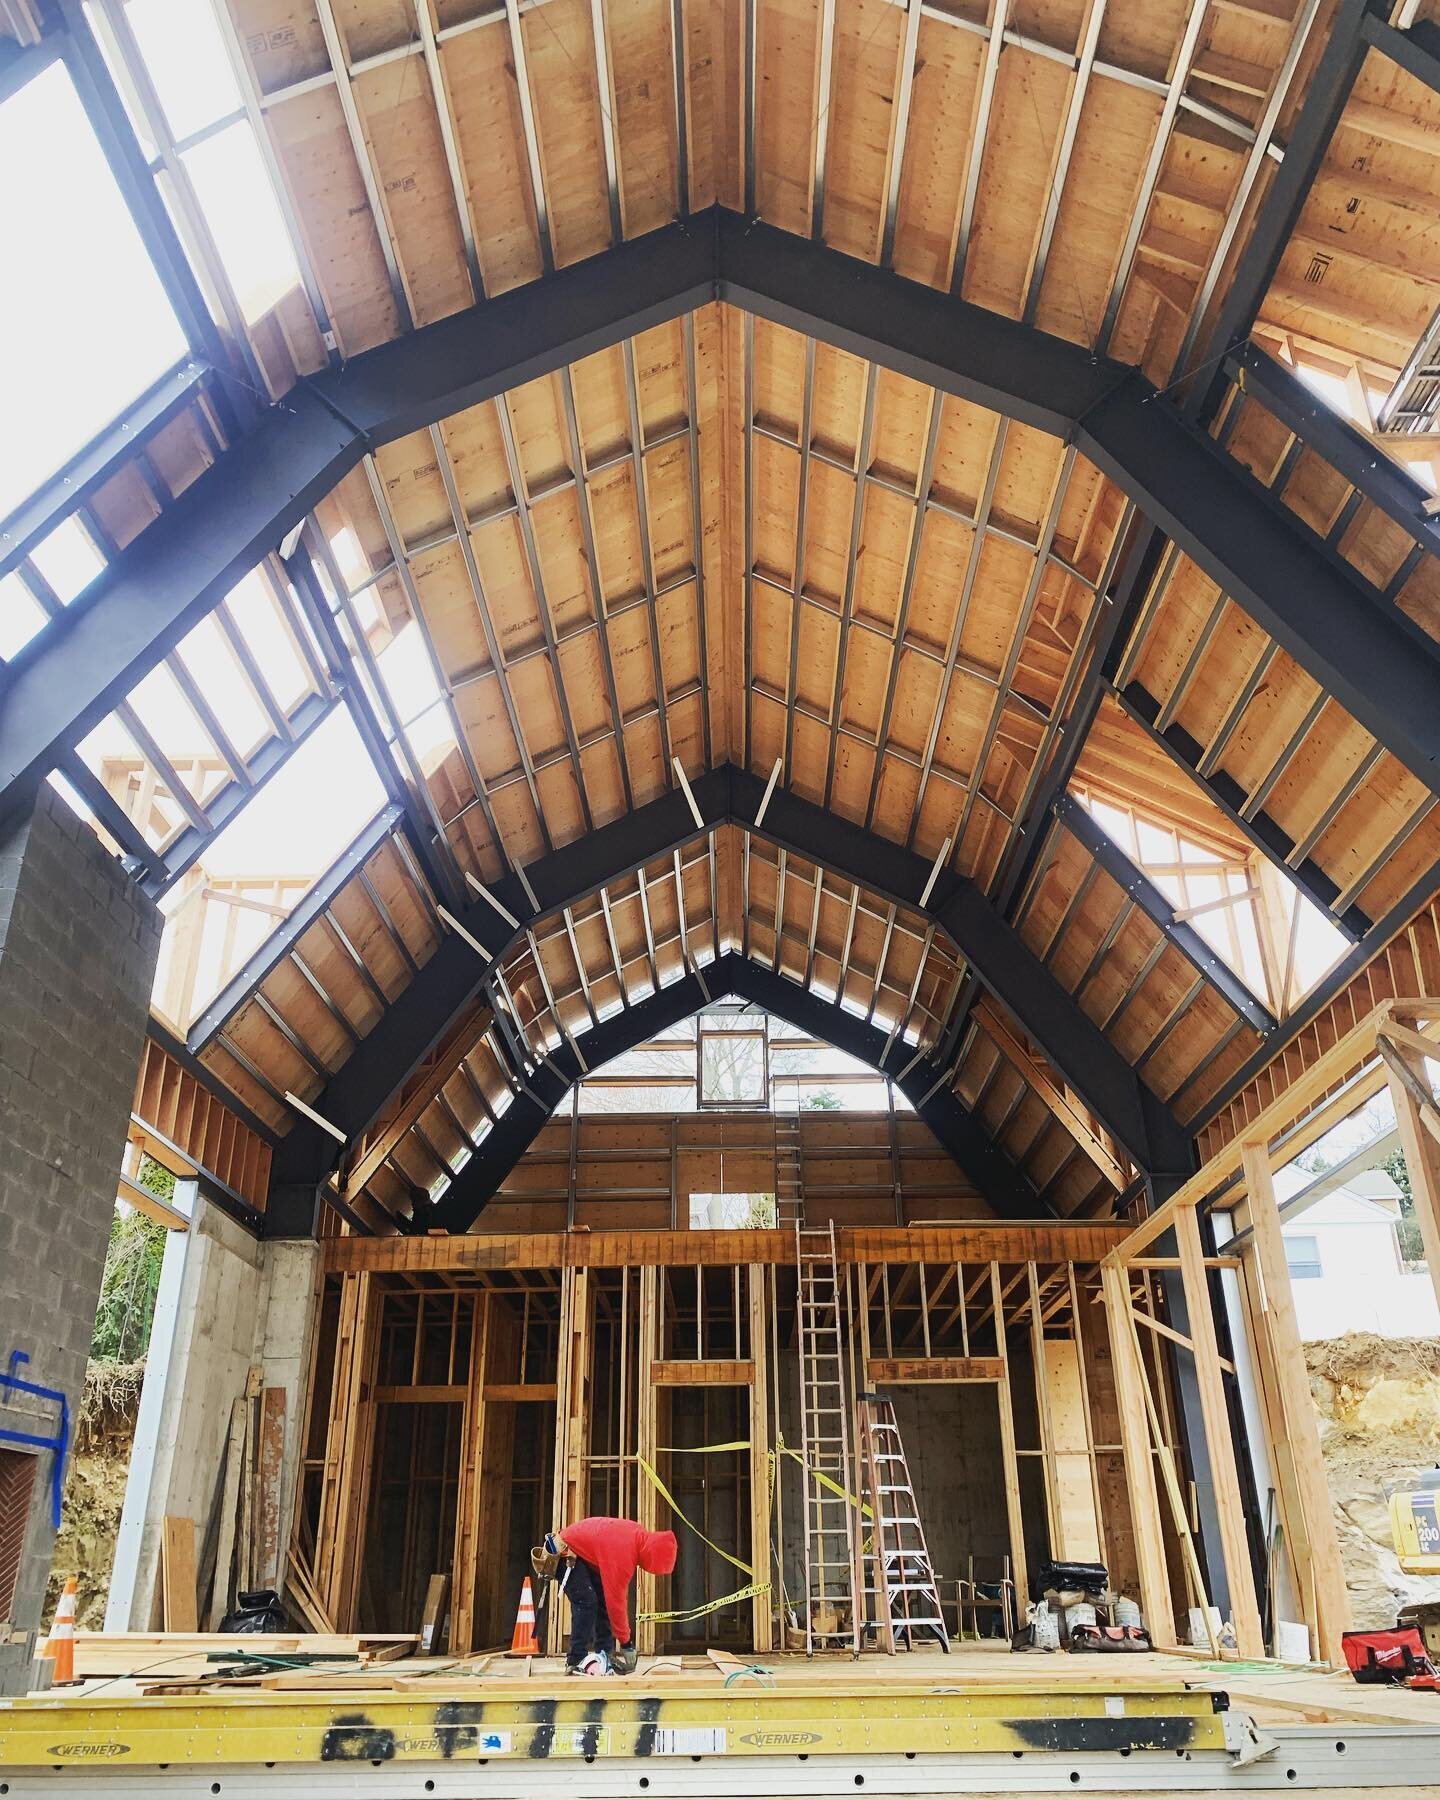 🚧 Framing this beauty! 🚀 #greenwichct #framing #steel #builders #comercialconstruction #woodworking #architecure #fairfieldcounty #armstrongsteel